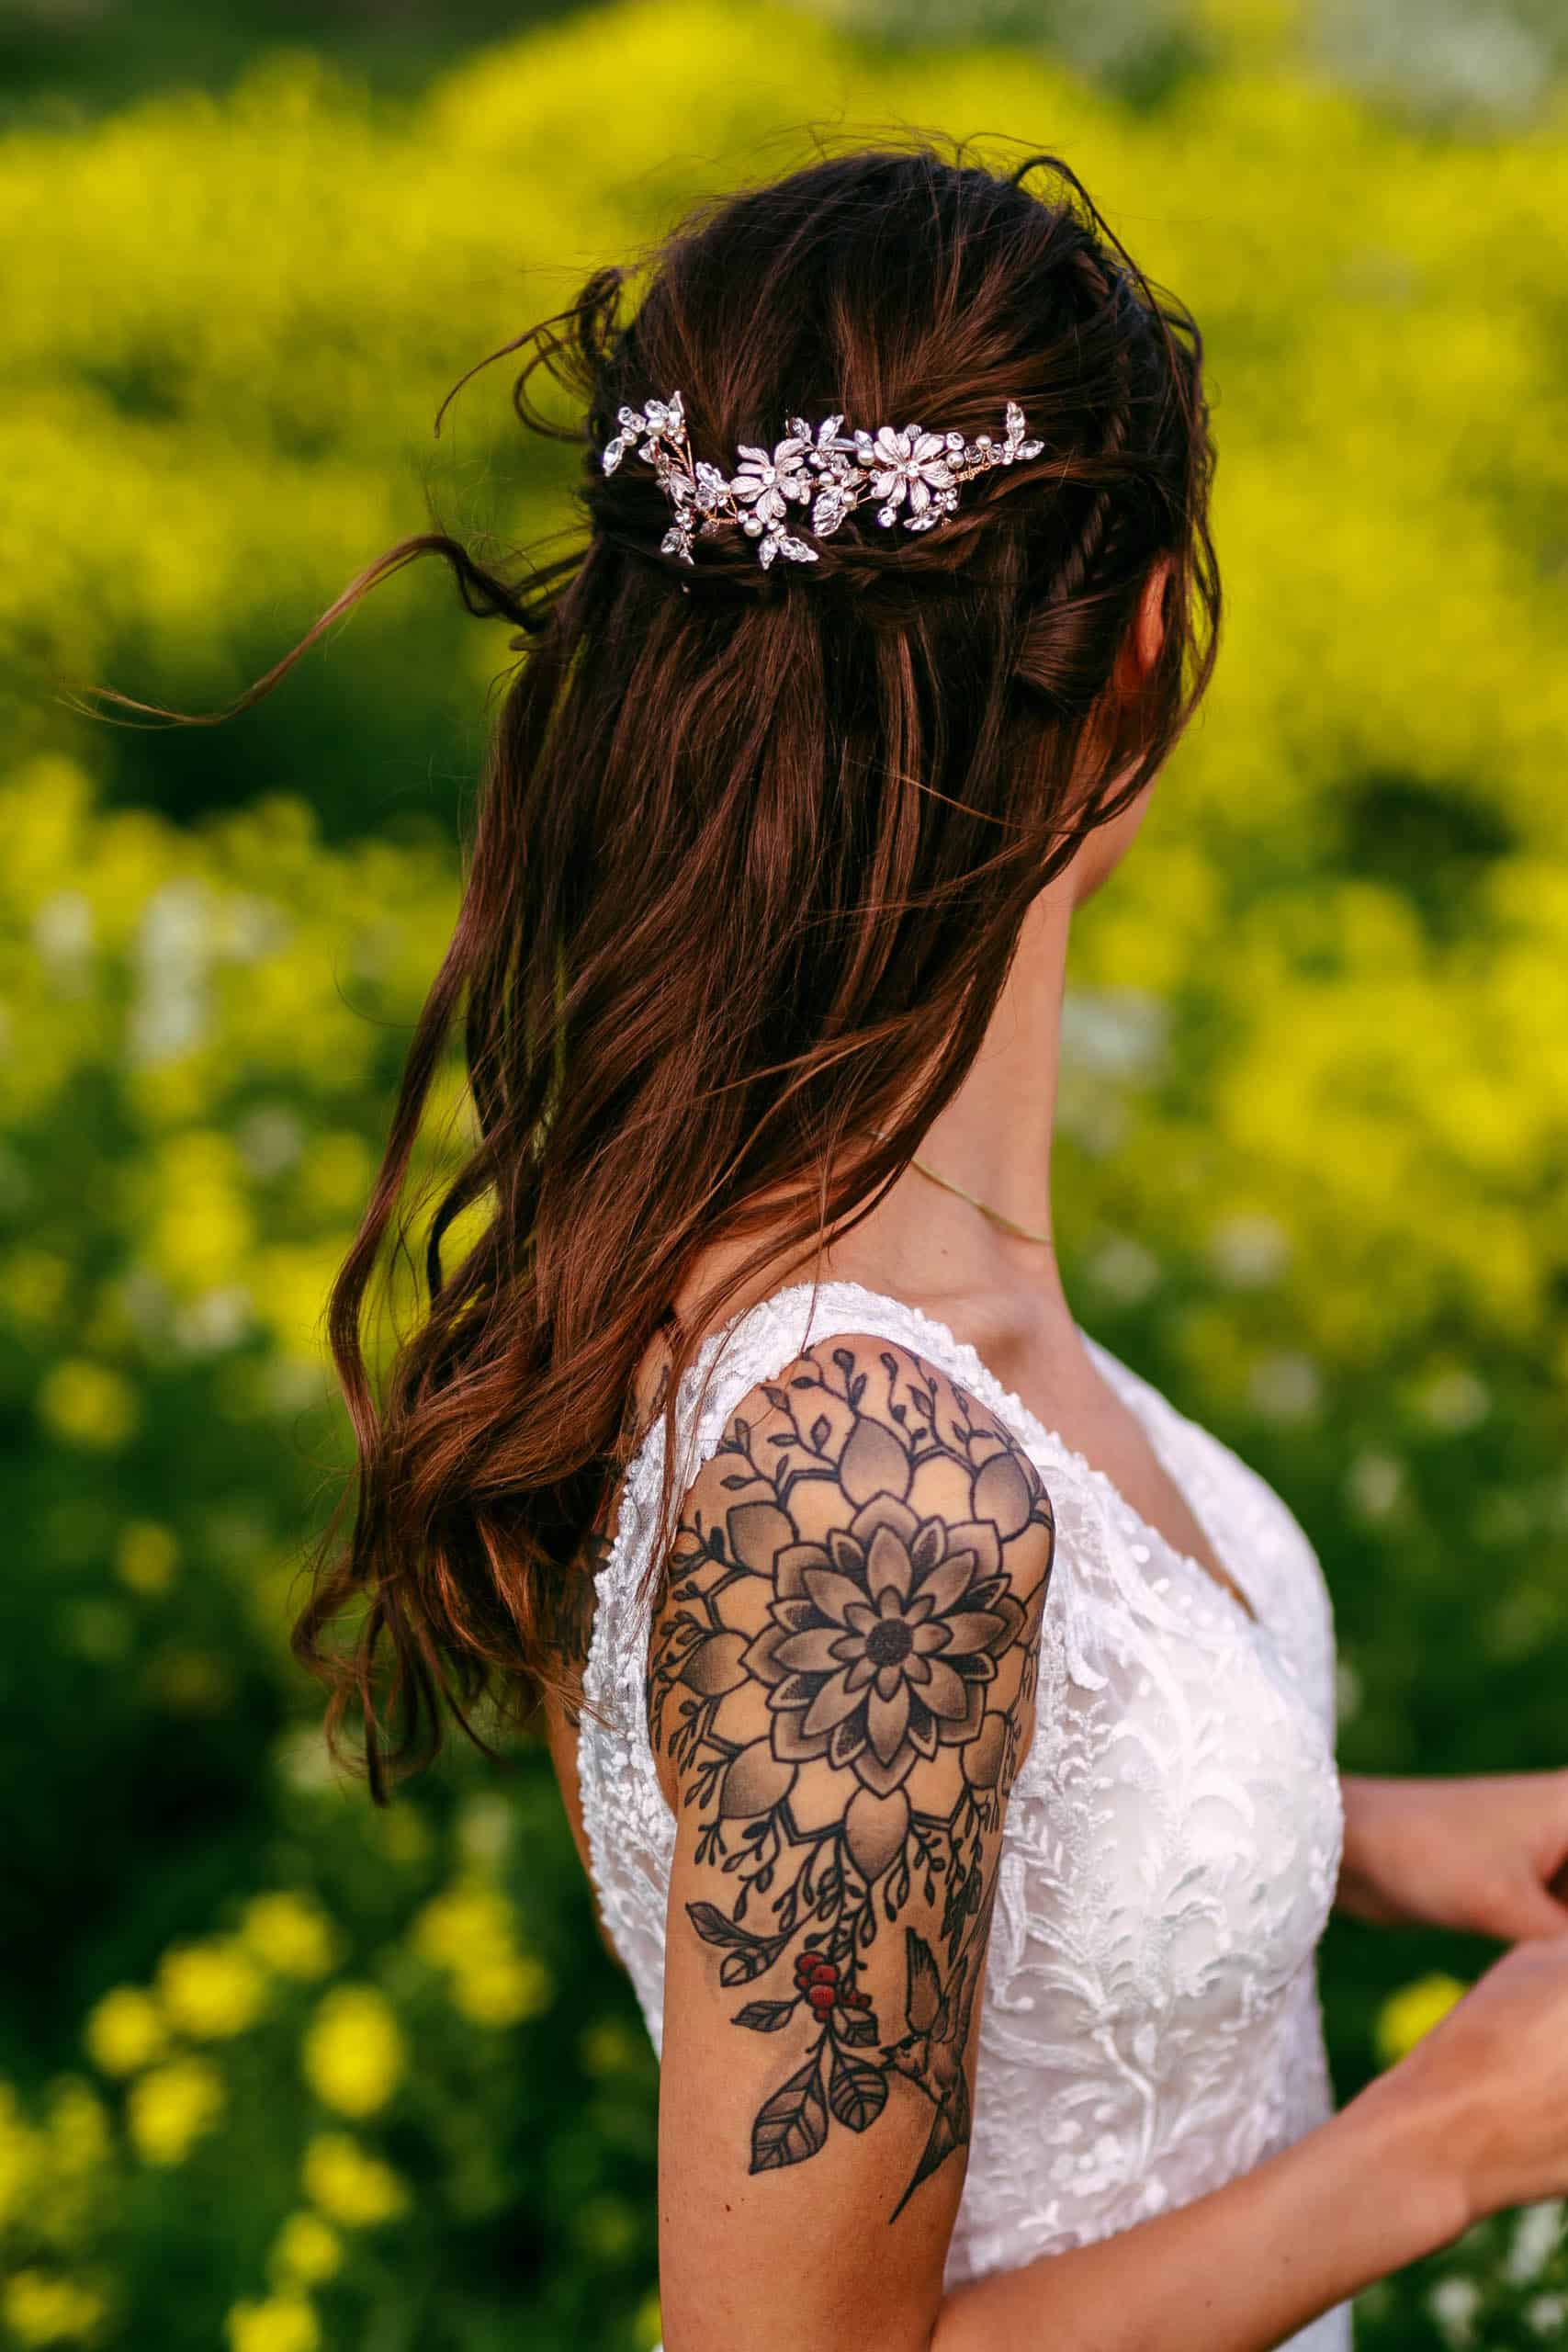 A bride with tattoos in a field.